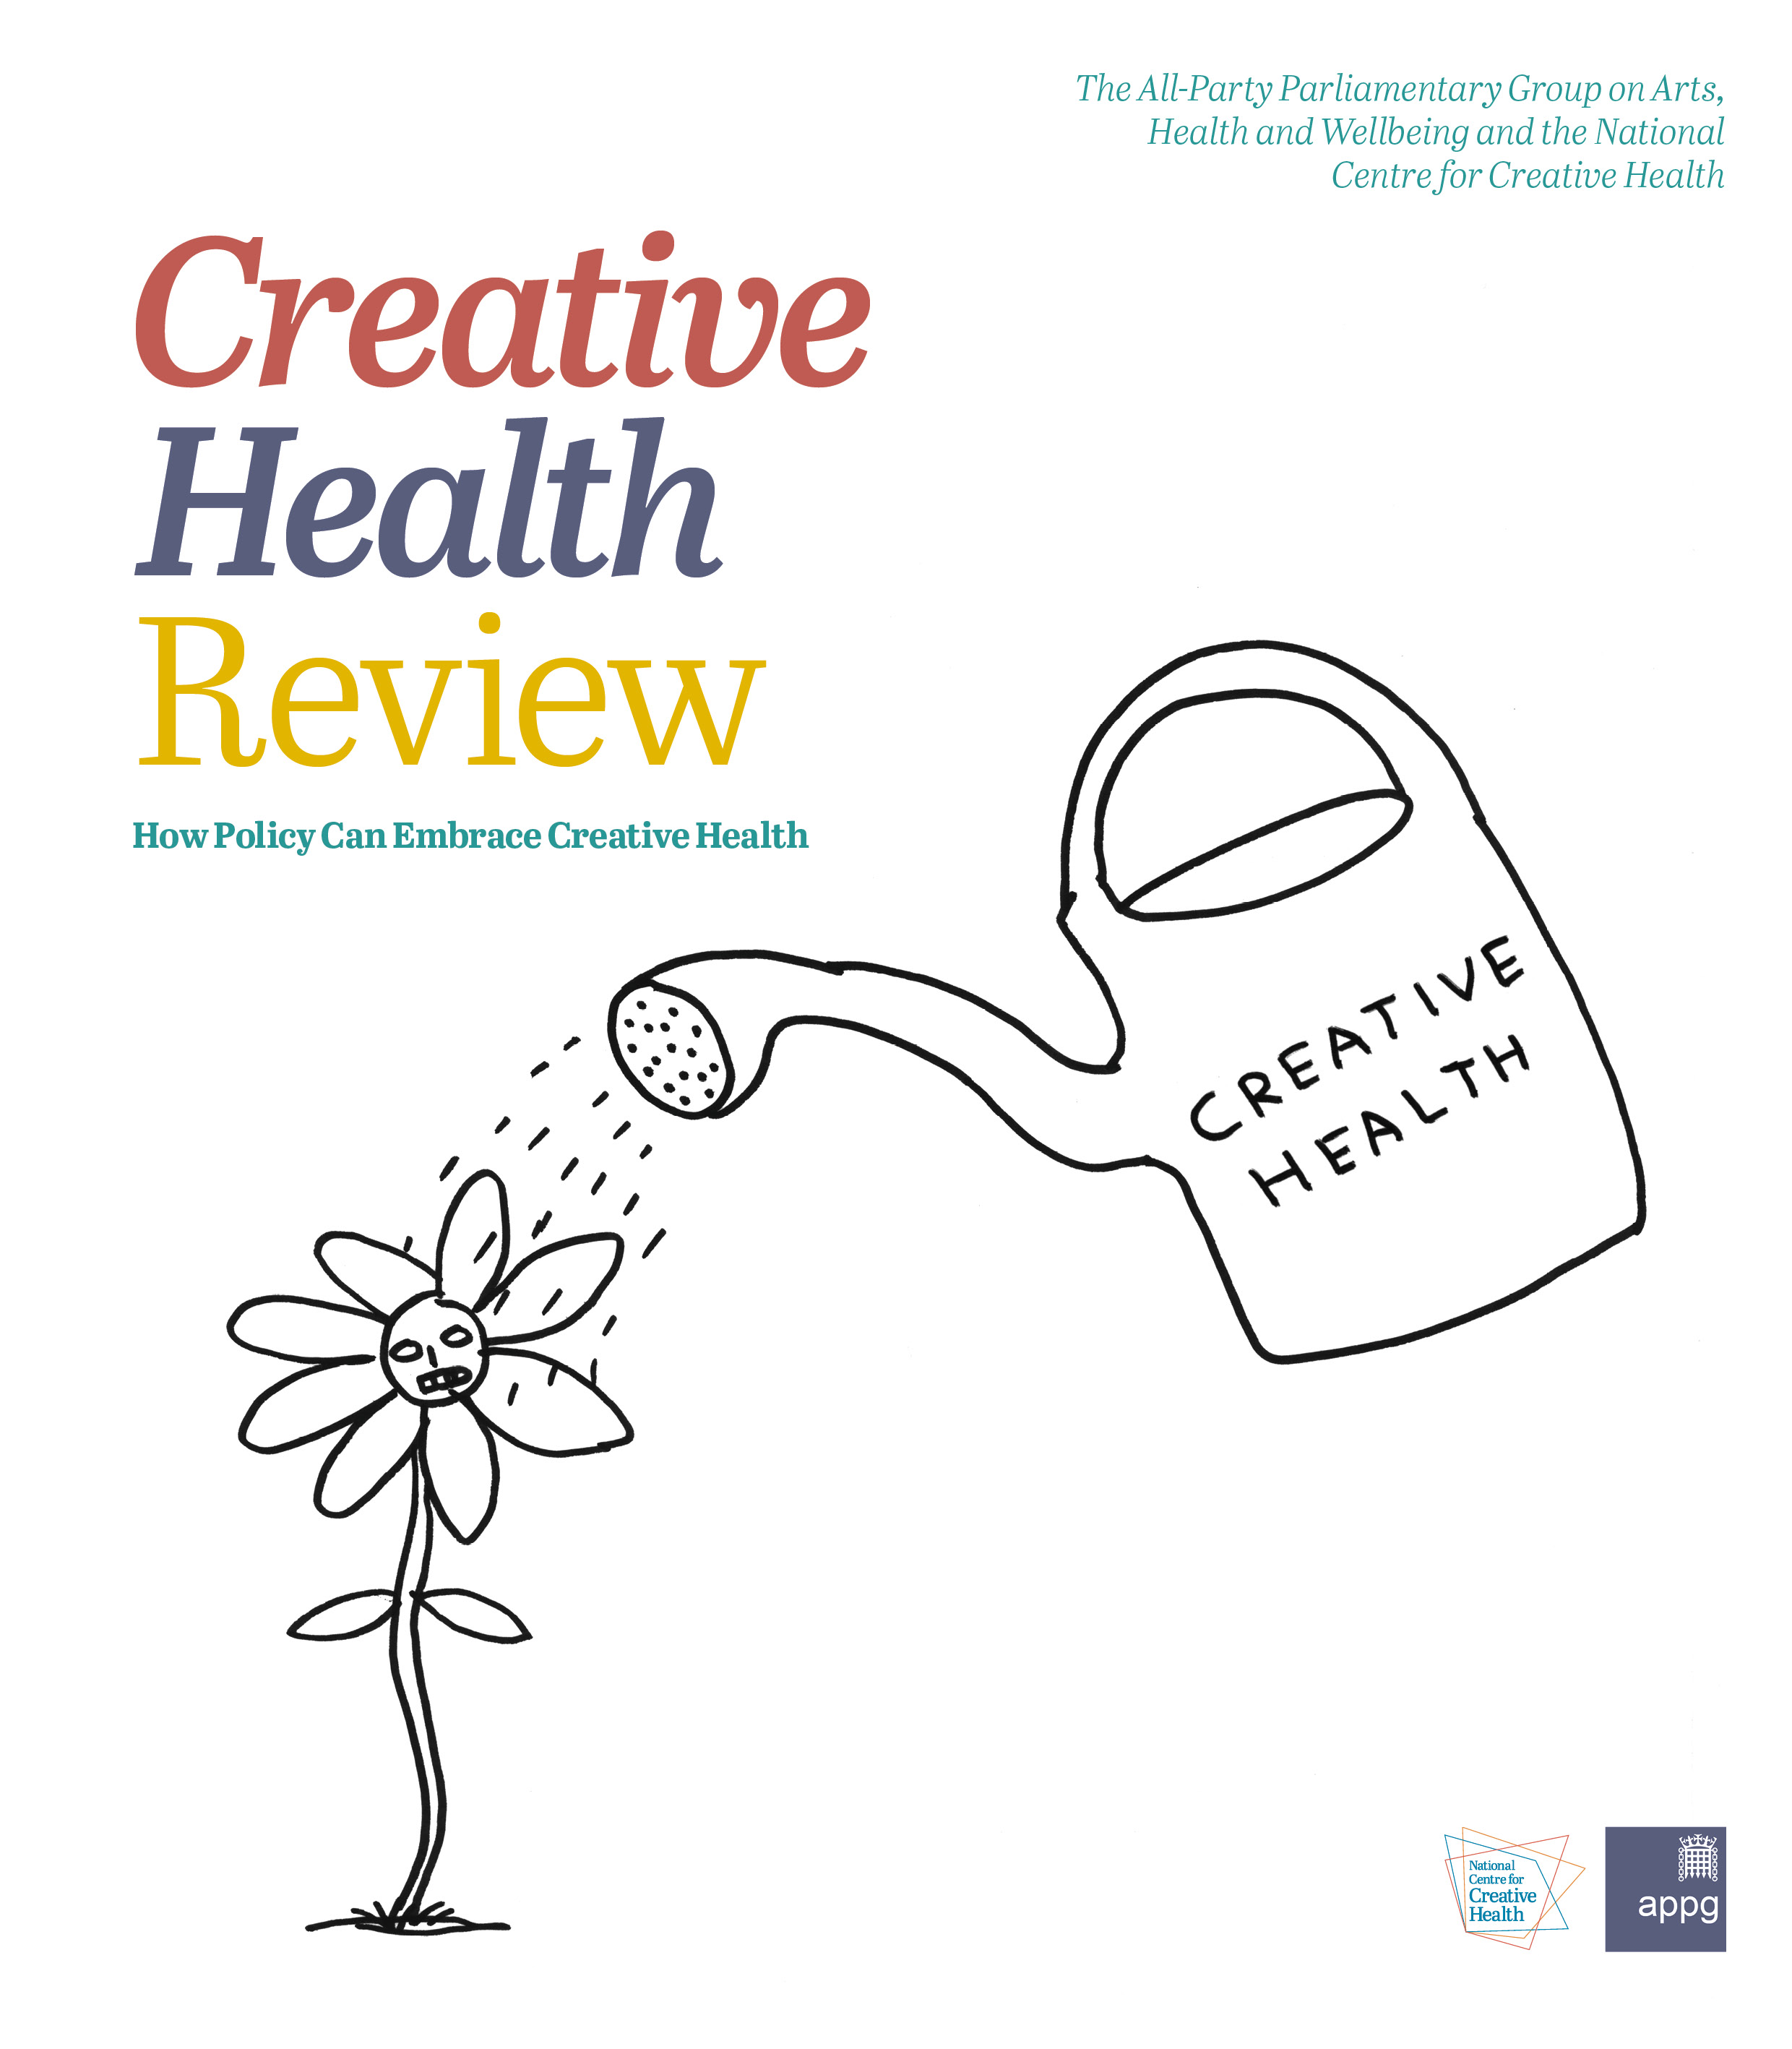 Creative Health Review Front Cover includes Creative Health illustration by David Shrigley